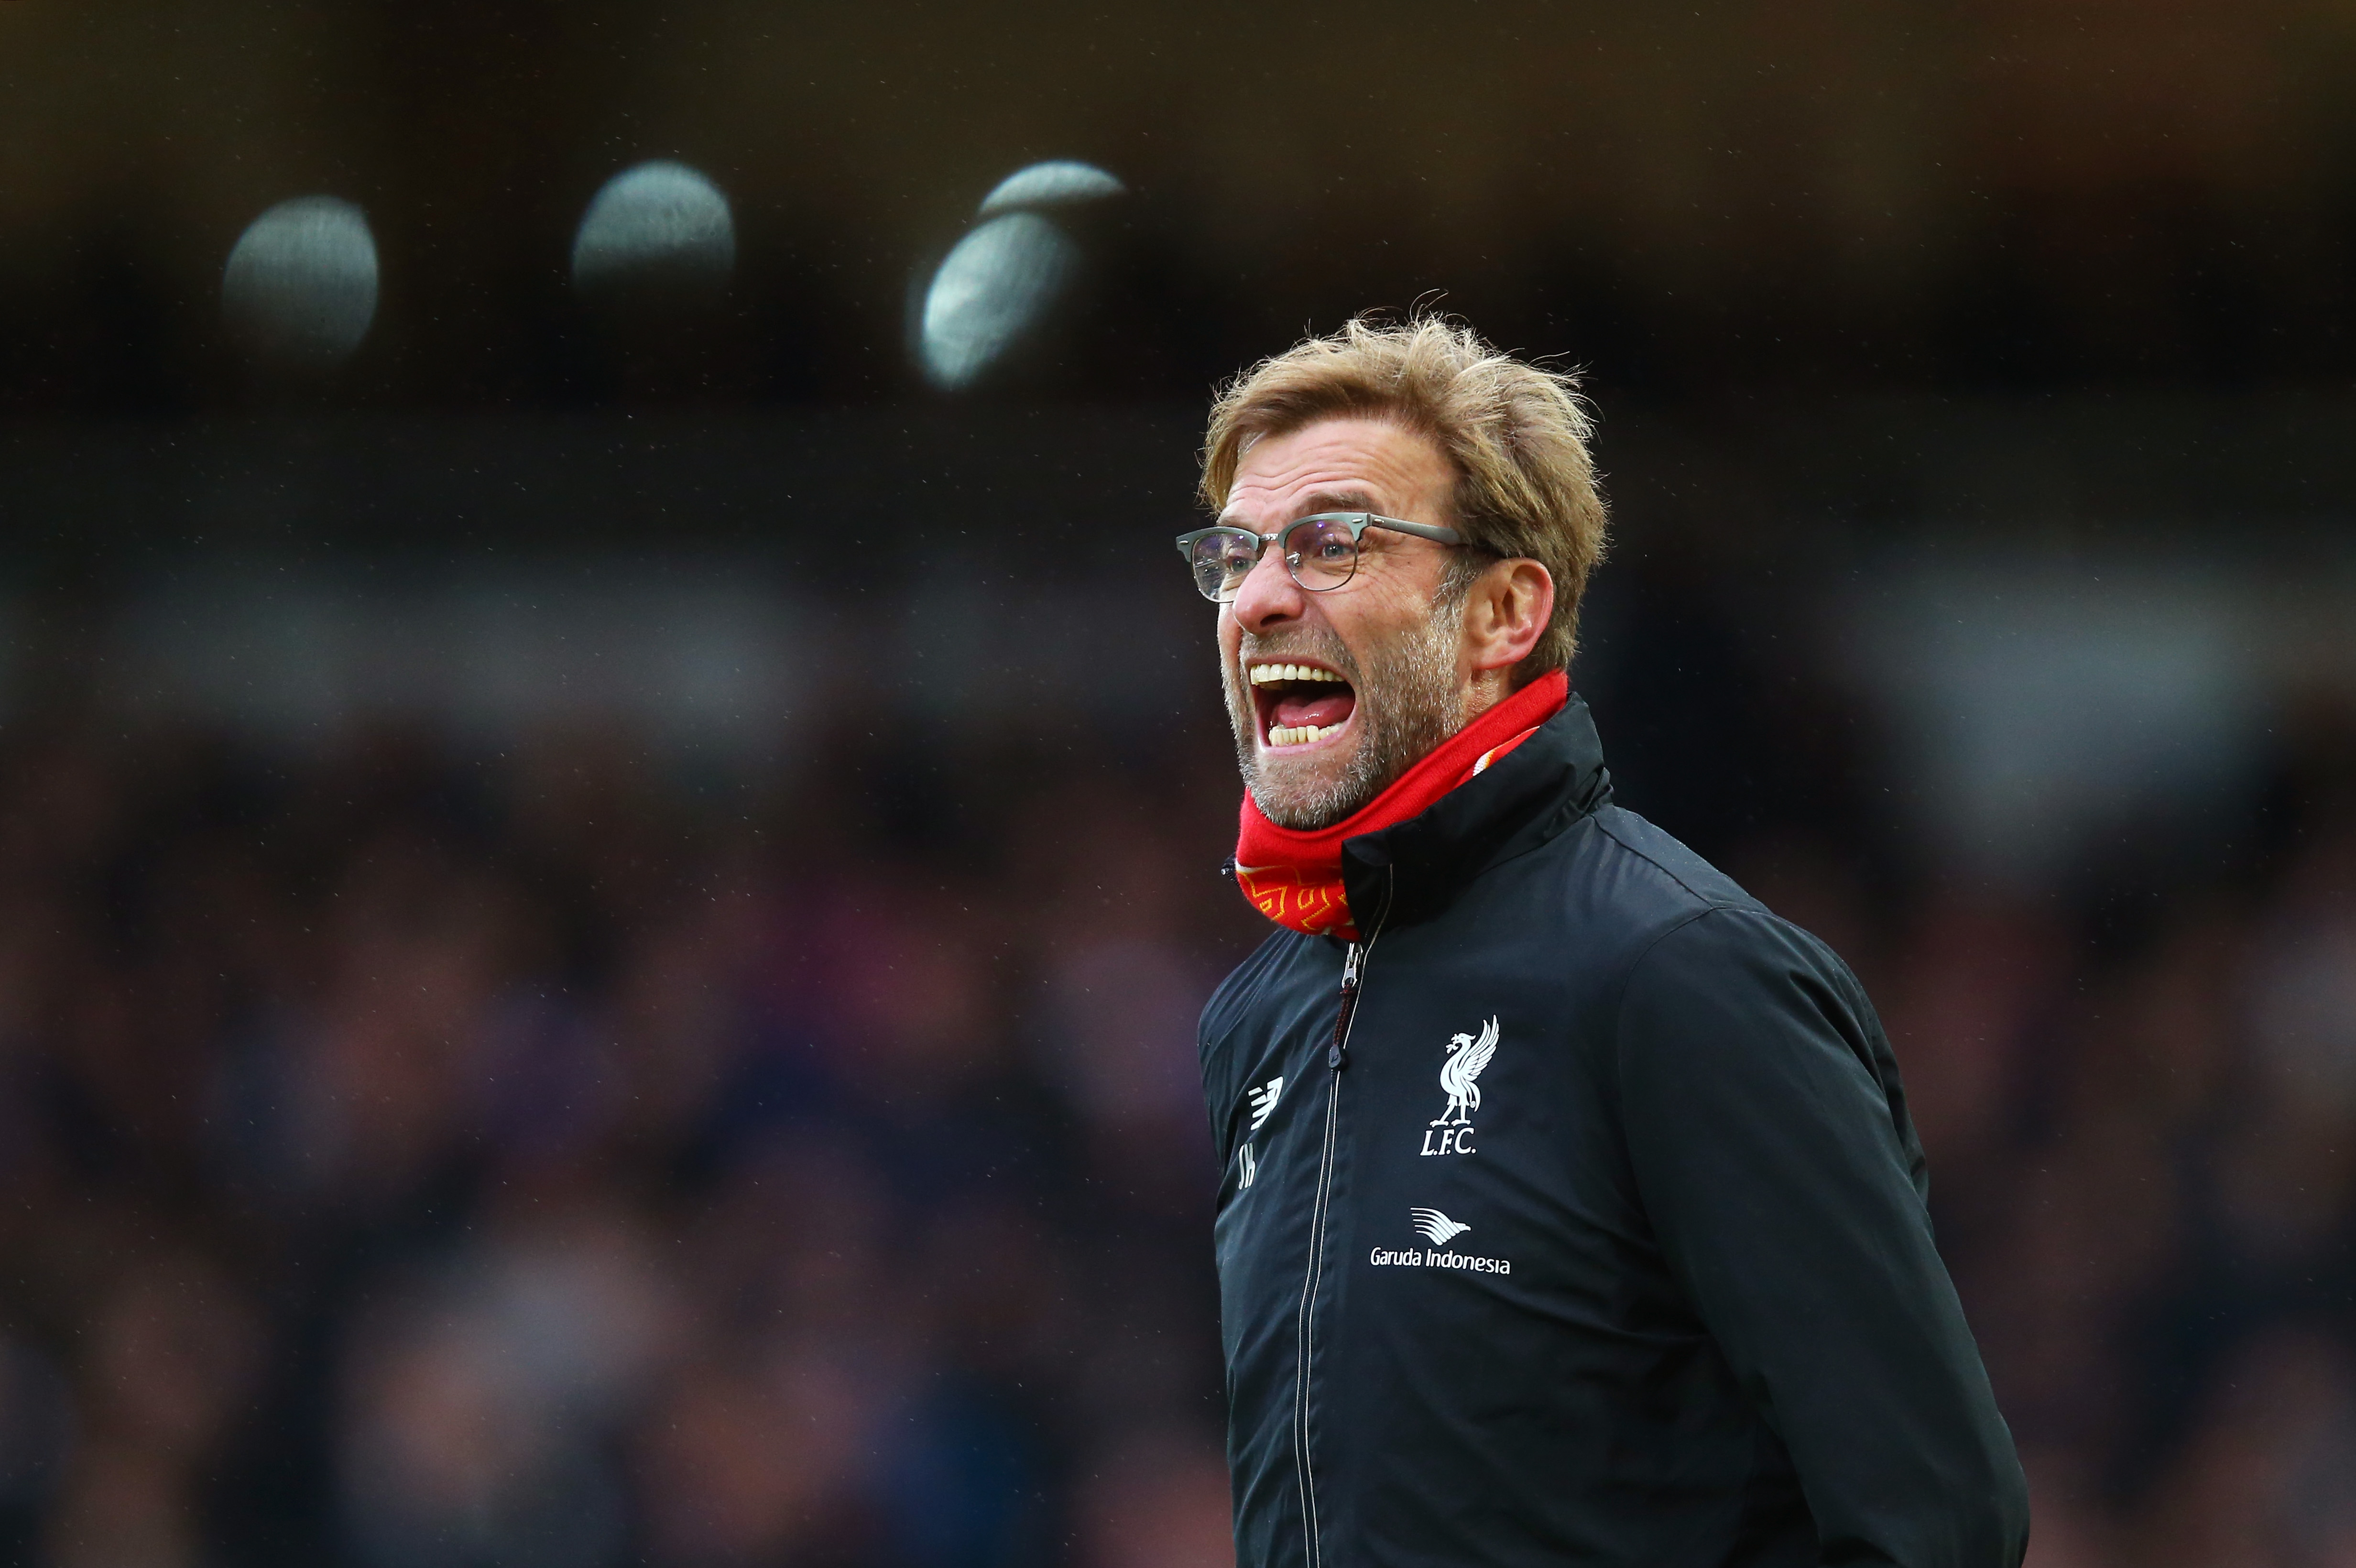 Liverpool , Liverpool Stoke, Liverpool lineup, Stoke lineup, Liverpool Stoke lineup, Liverpool stream, online, channel, when, time, watch, free, live